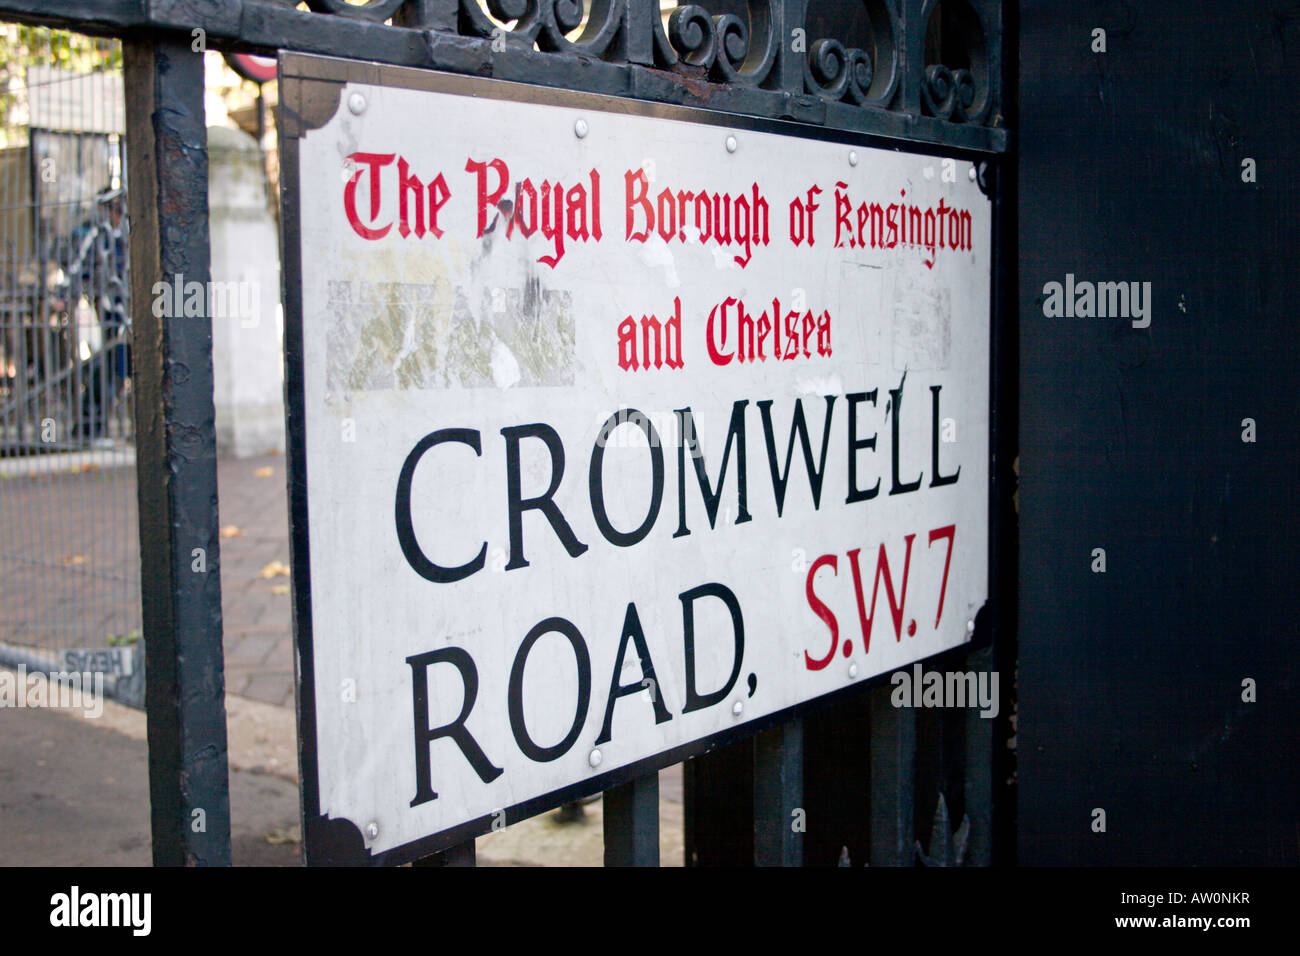 Cromwell Road London SW7 street name sign Stock Photo